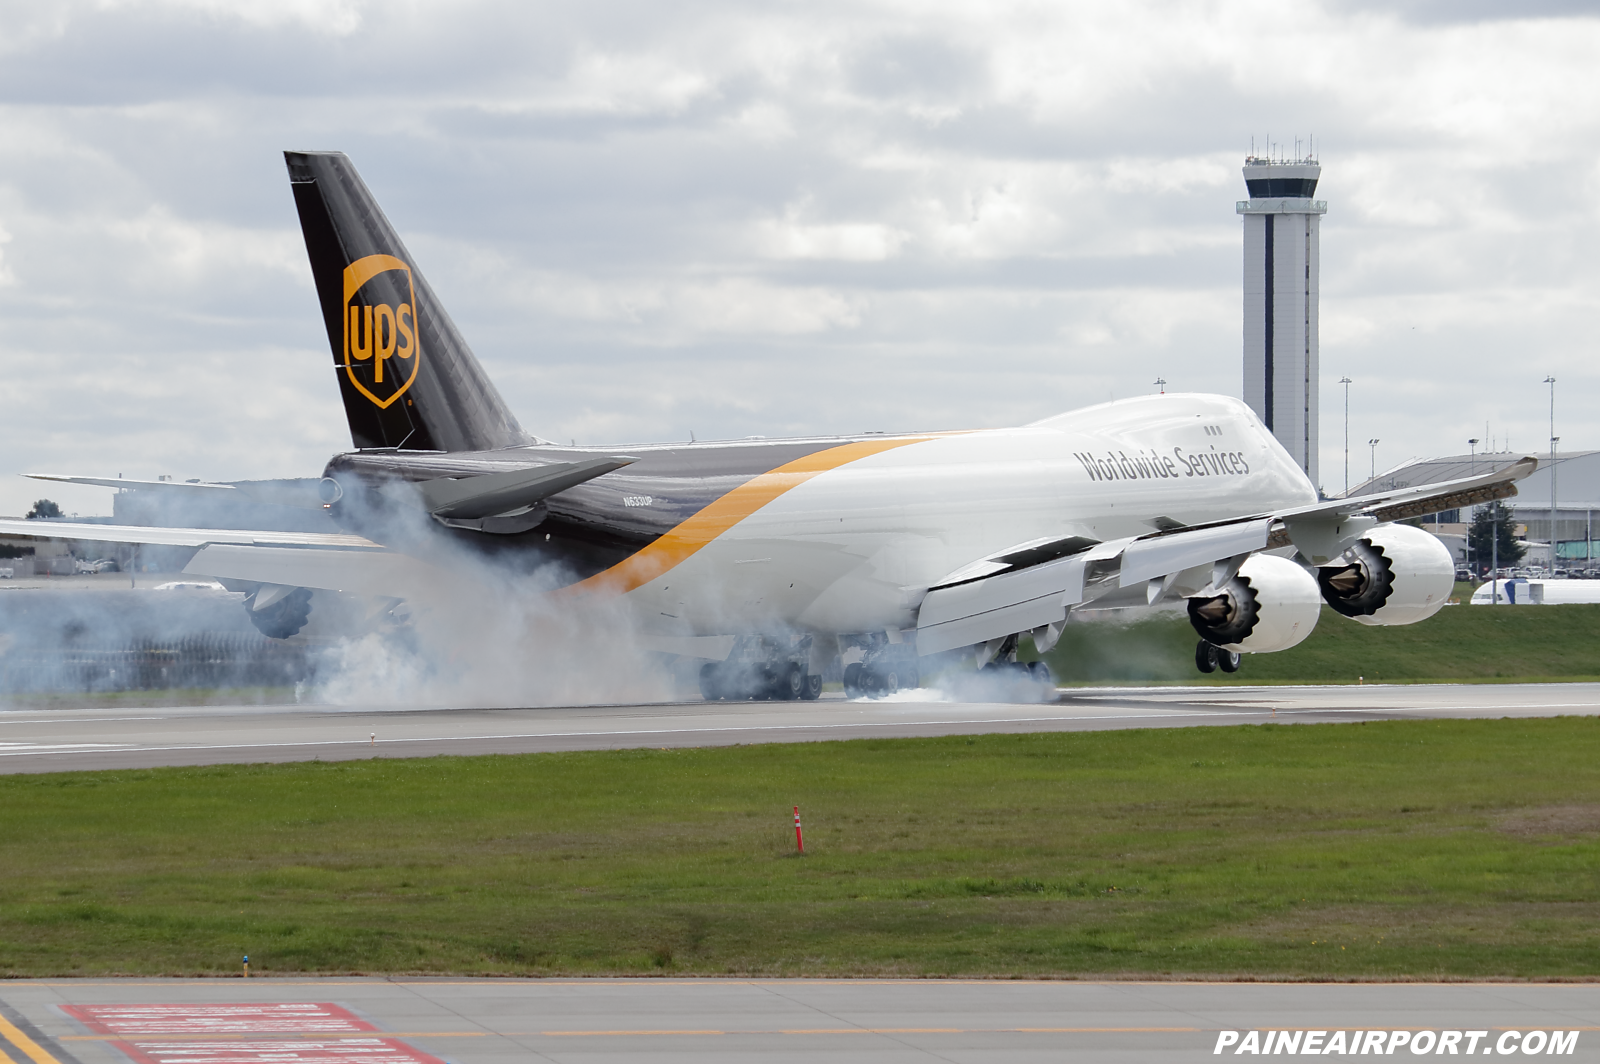 UPS 747-8F N633UP at KPAE Paine Field